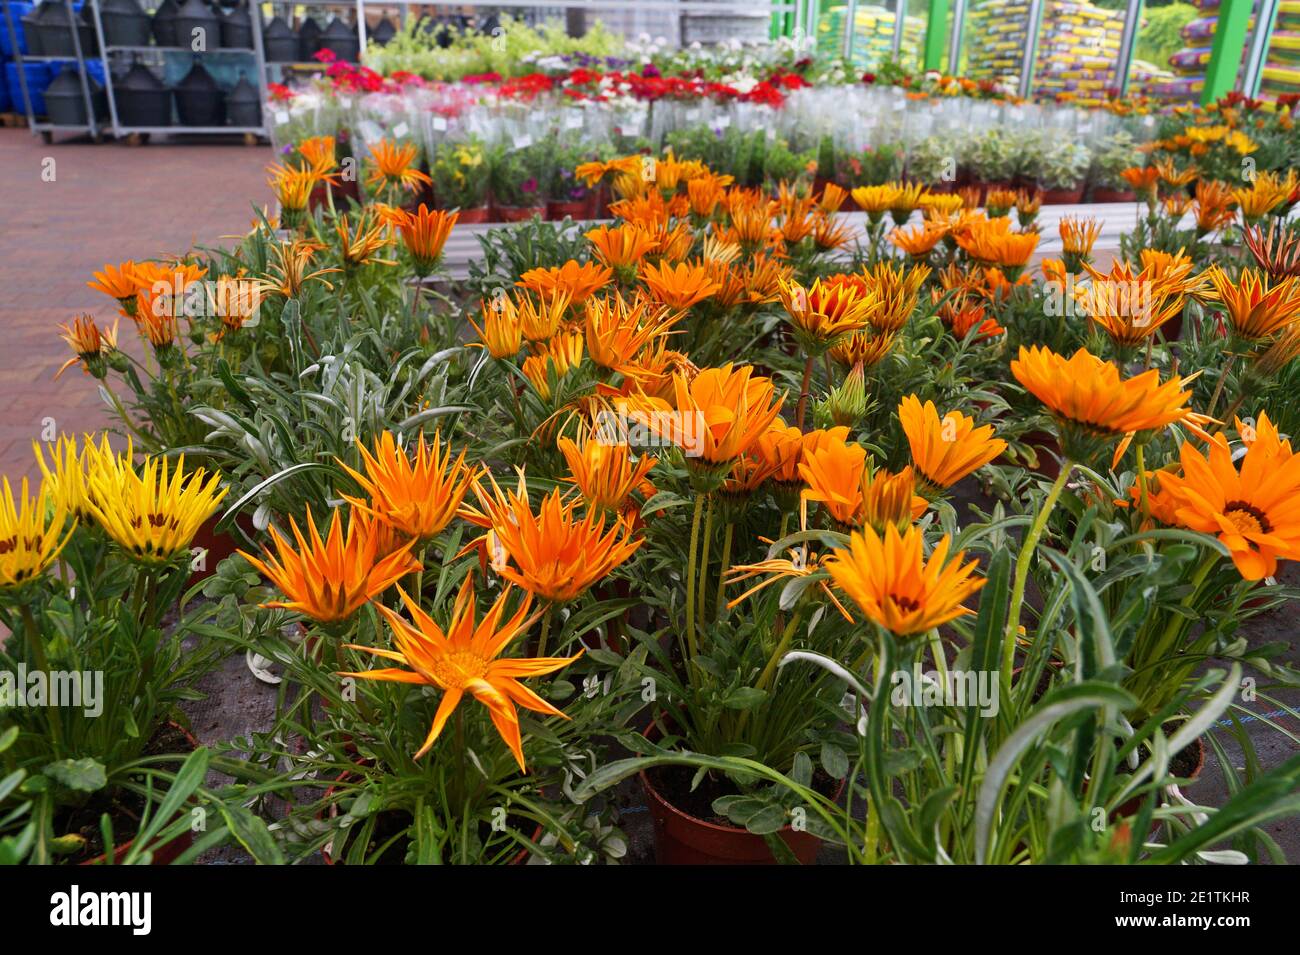 Garden shop. Gazania (Gazania rigens L.) is a genus of flowering plants in the family Asteraceae, native to Southern Africa. Stock Photo